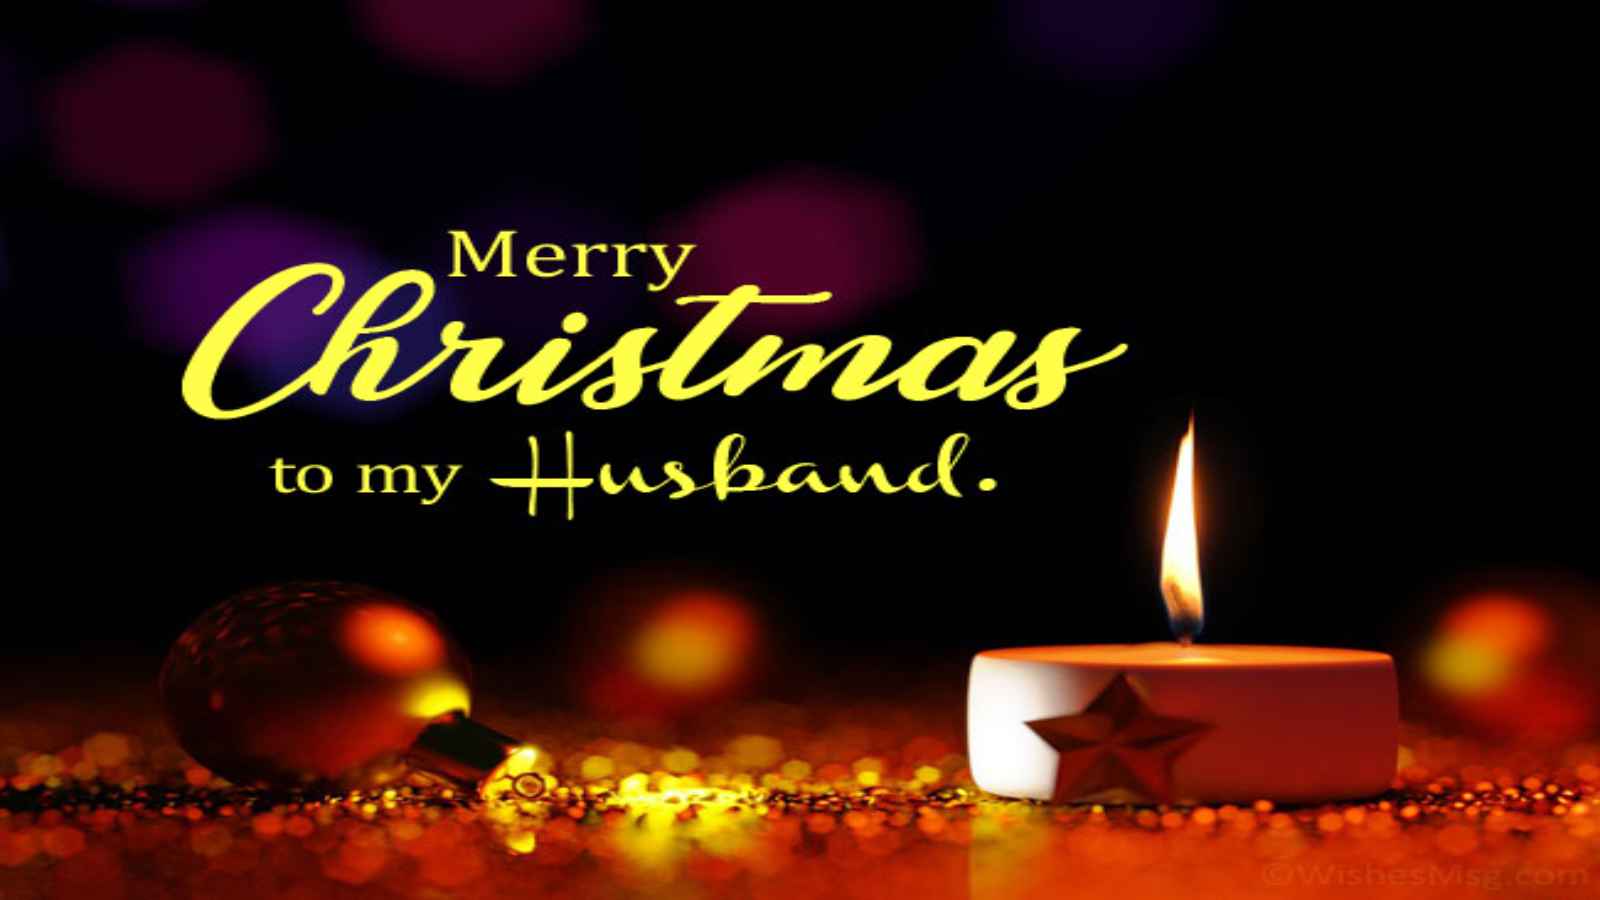 Romantic Christmas Wishes, Messages, Greetings for Husband